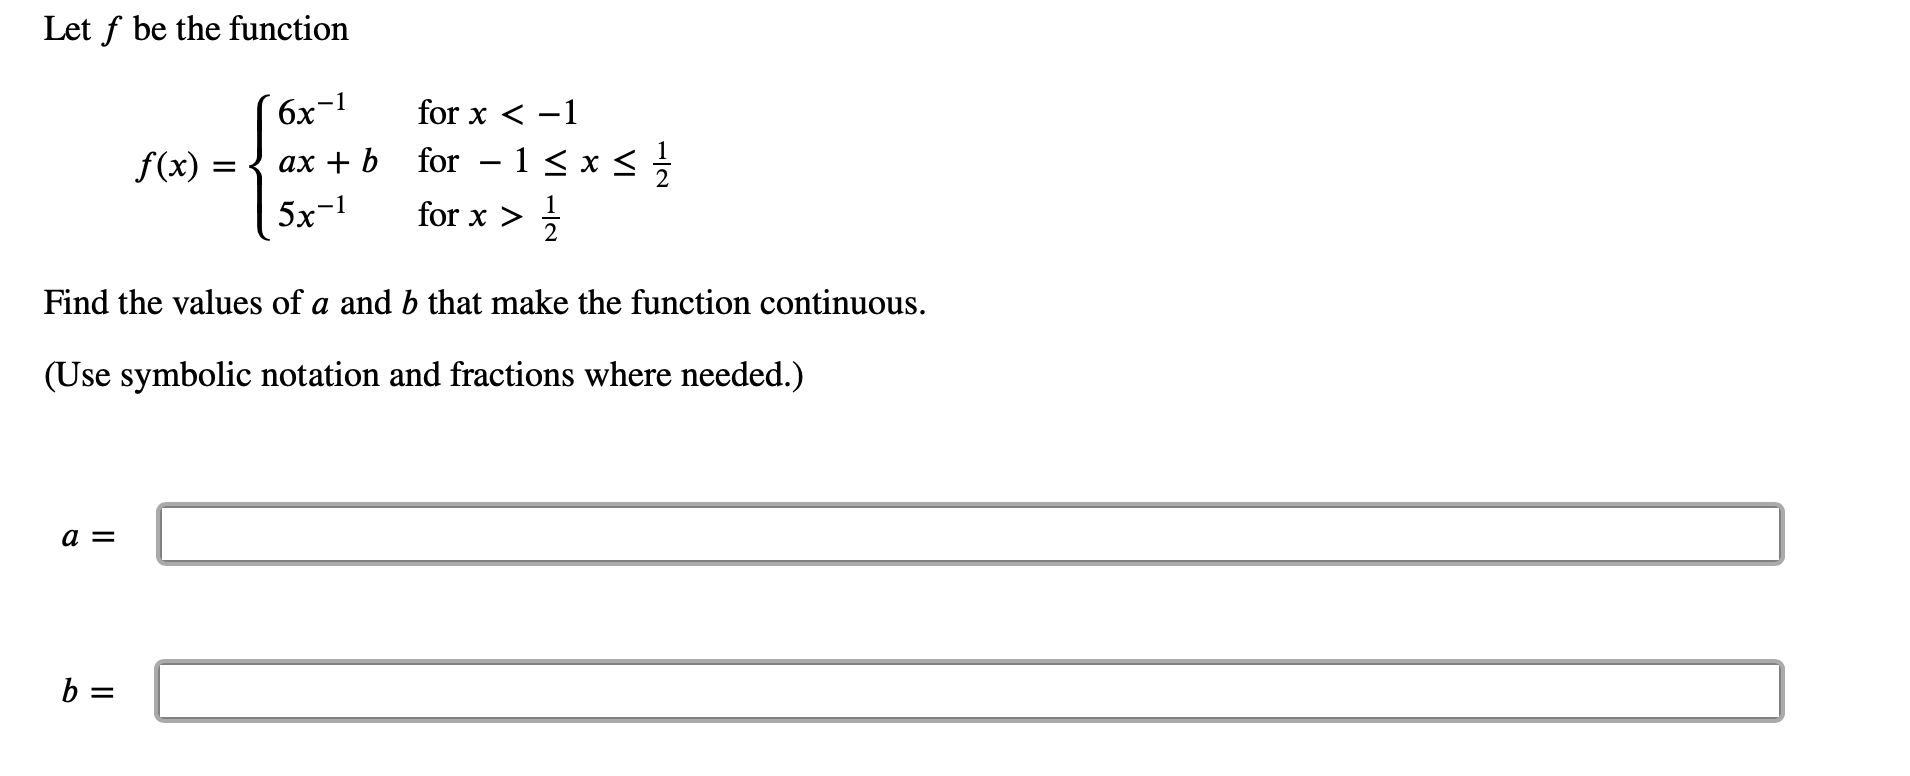 Let f be the function
for x 1
бх-1
ax b for 1 x <
f(x)
5x-1
for x>
2.
Find the values of a and b that make the function continuous
(Use symbolic notation and fractions where needed.)
а %3
